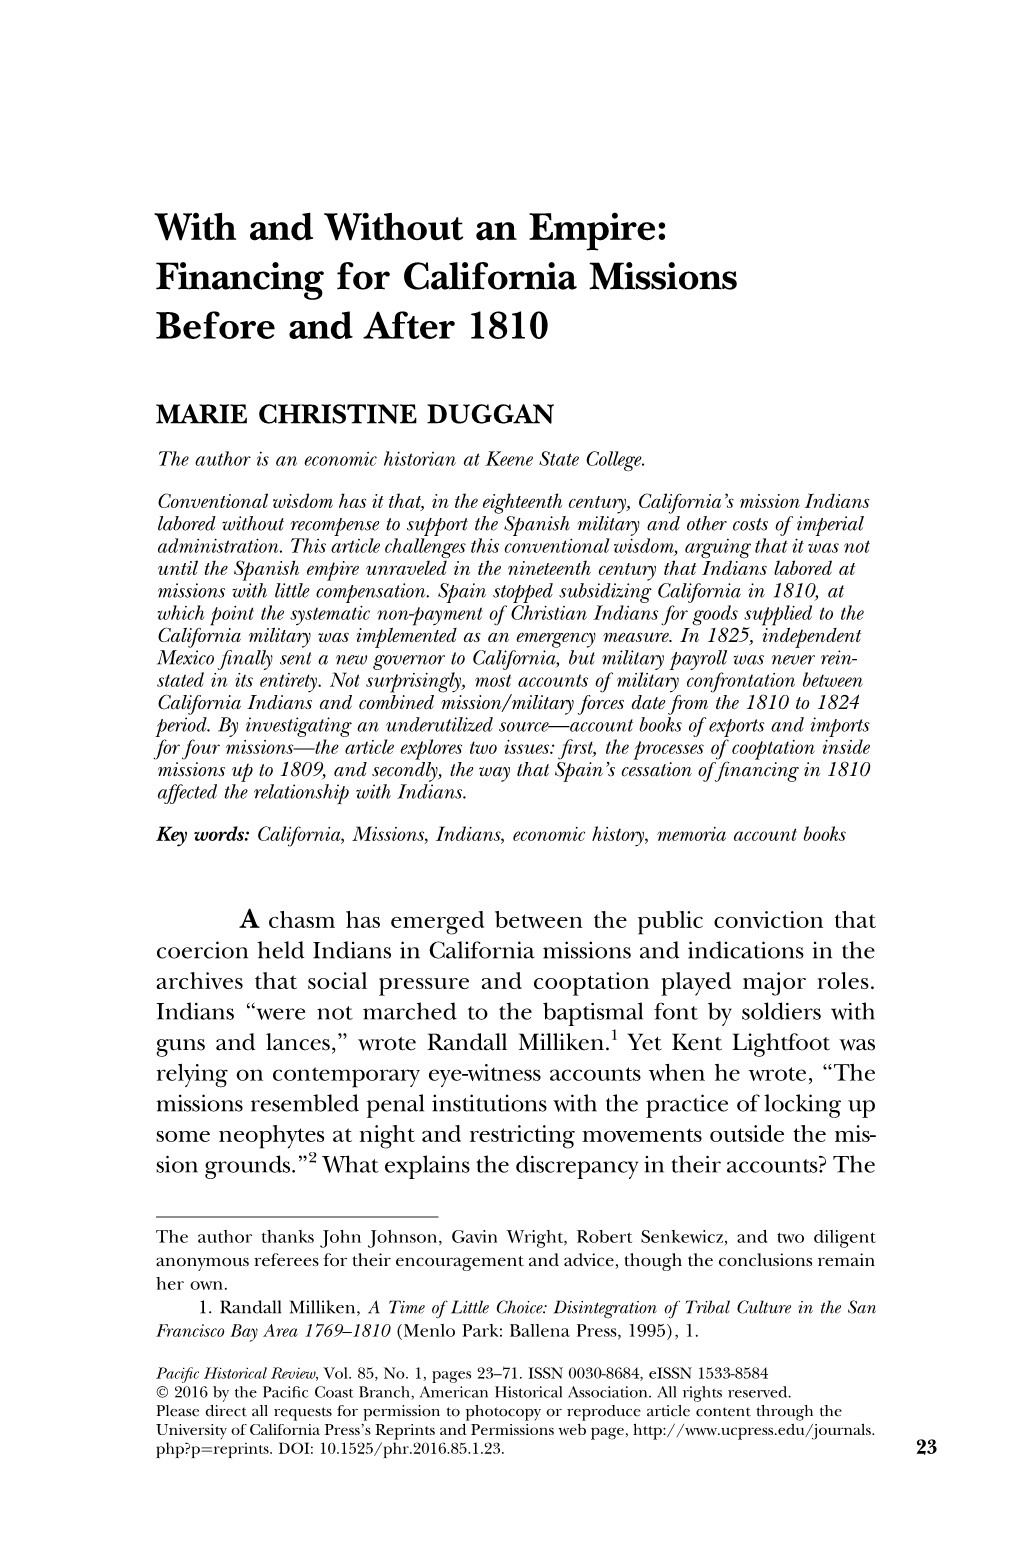 Financing for California Missions Before and After 1810